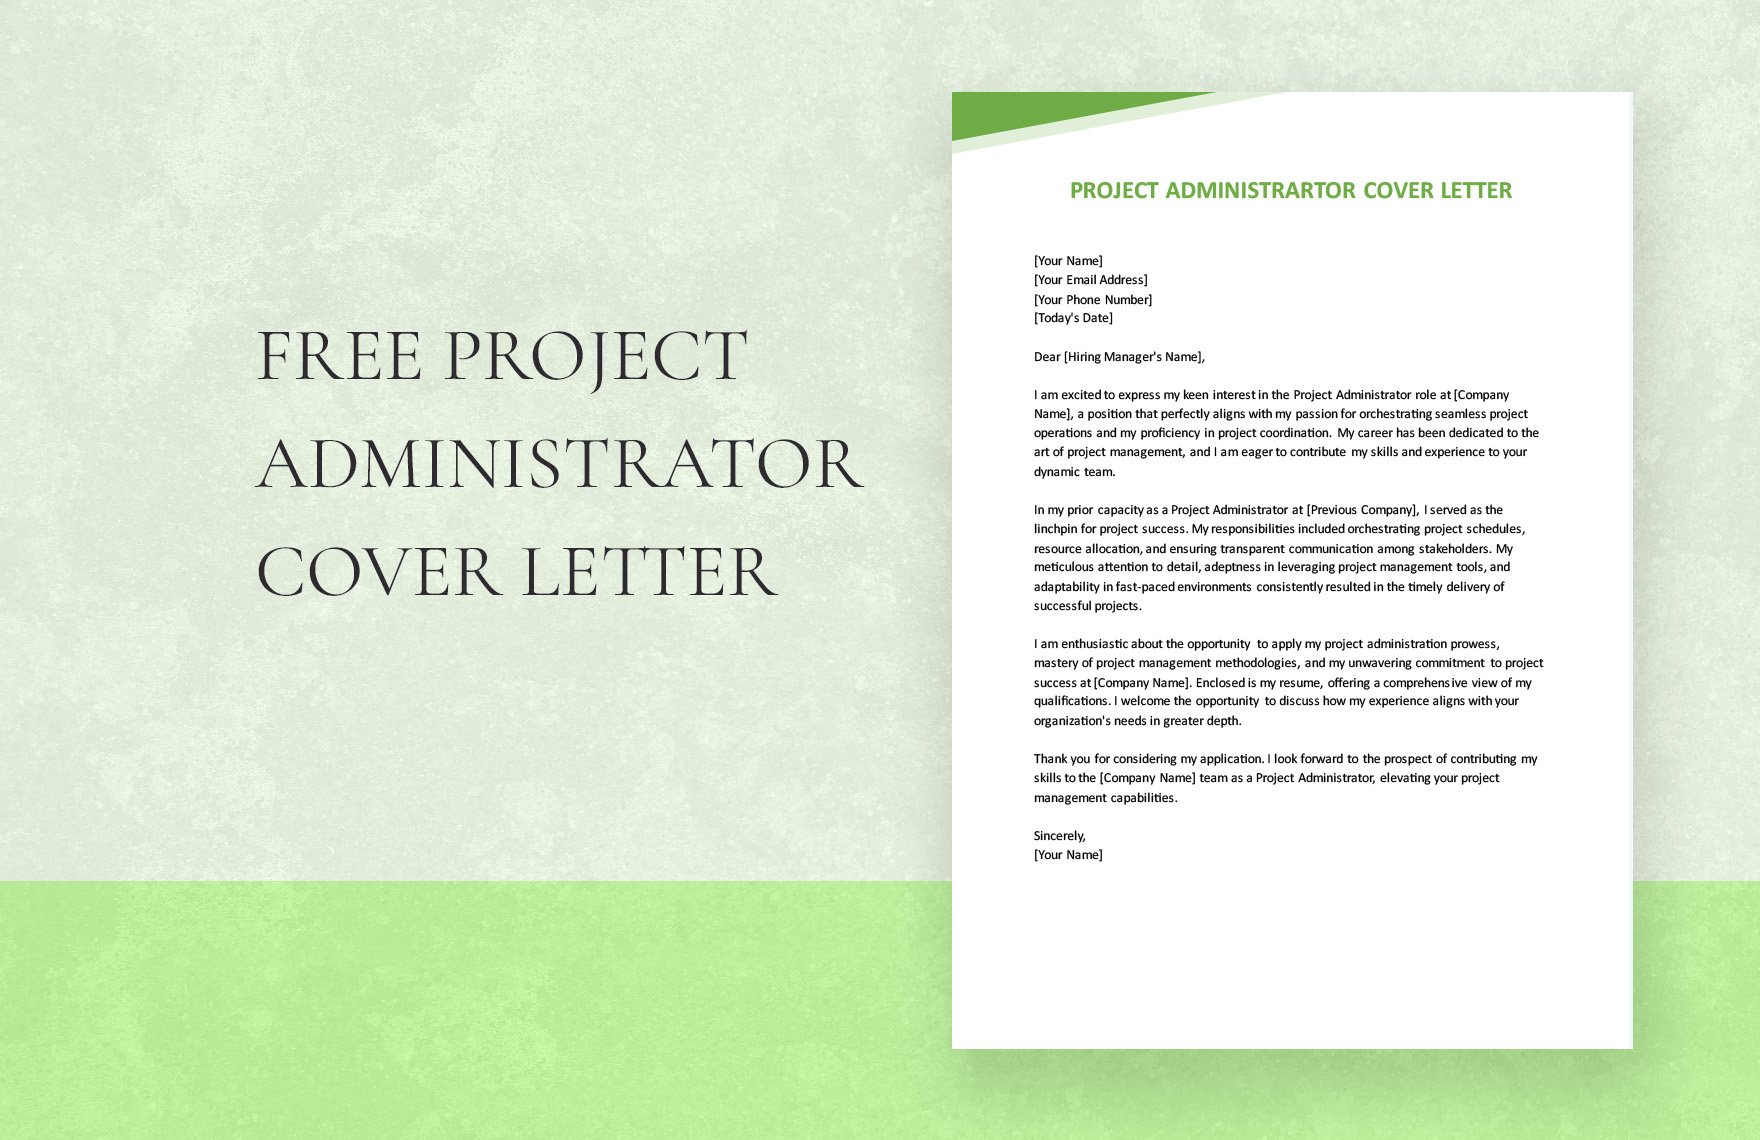 Project Administrator Cover Letter in Word, Google Docs, PDF